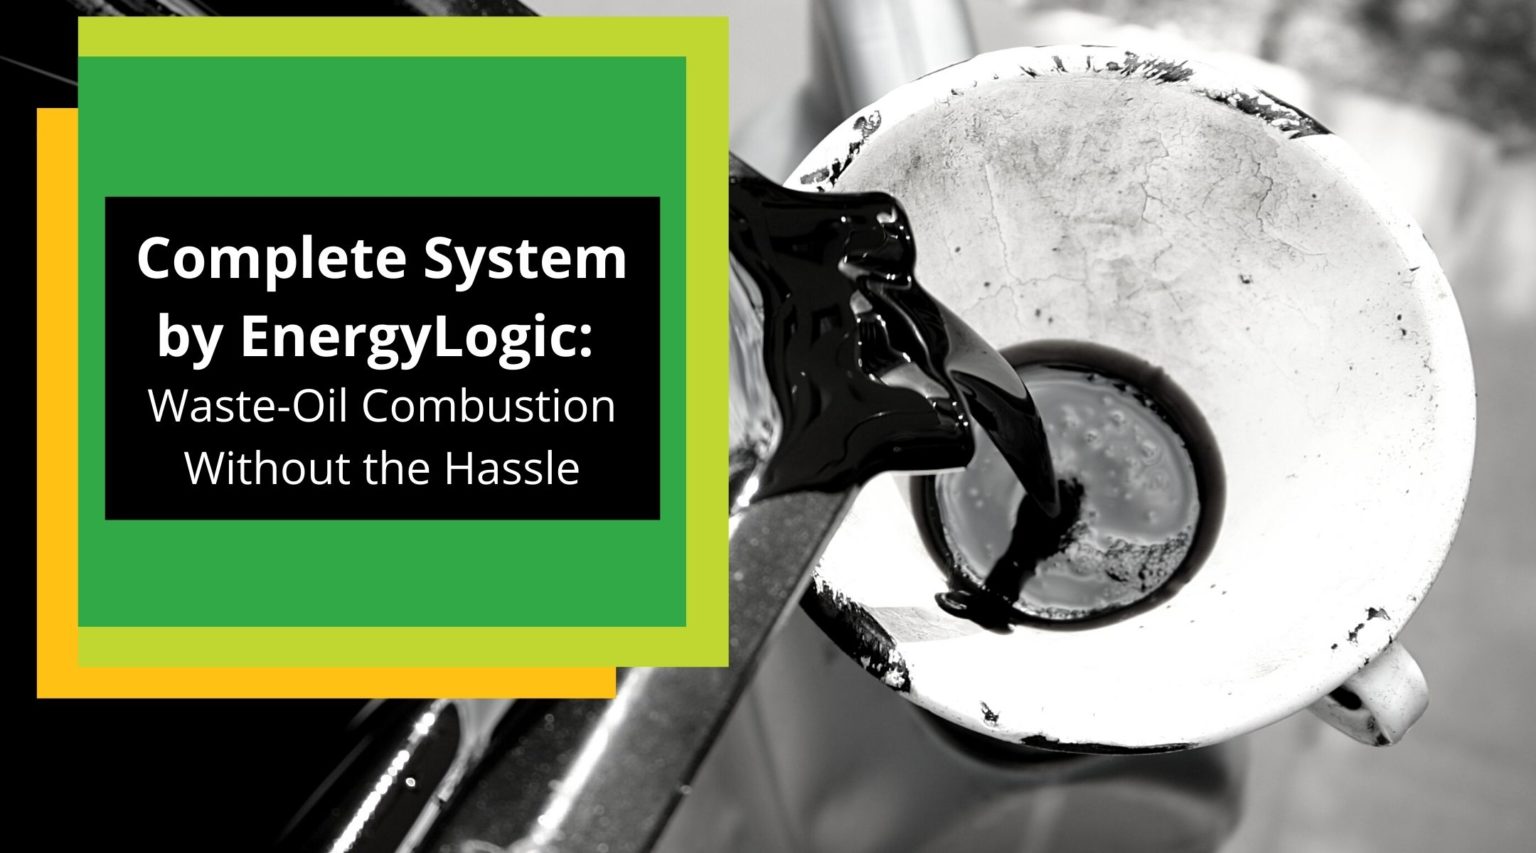 Complete System by EnergyLogic_ Waste-Oil Combustion Without the Hassle